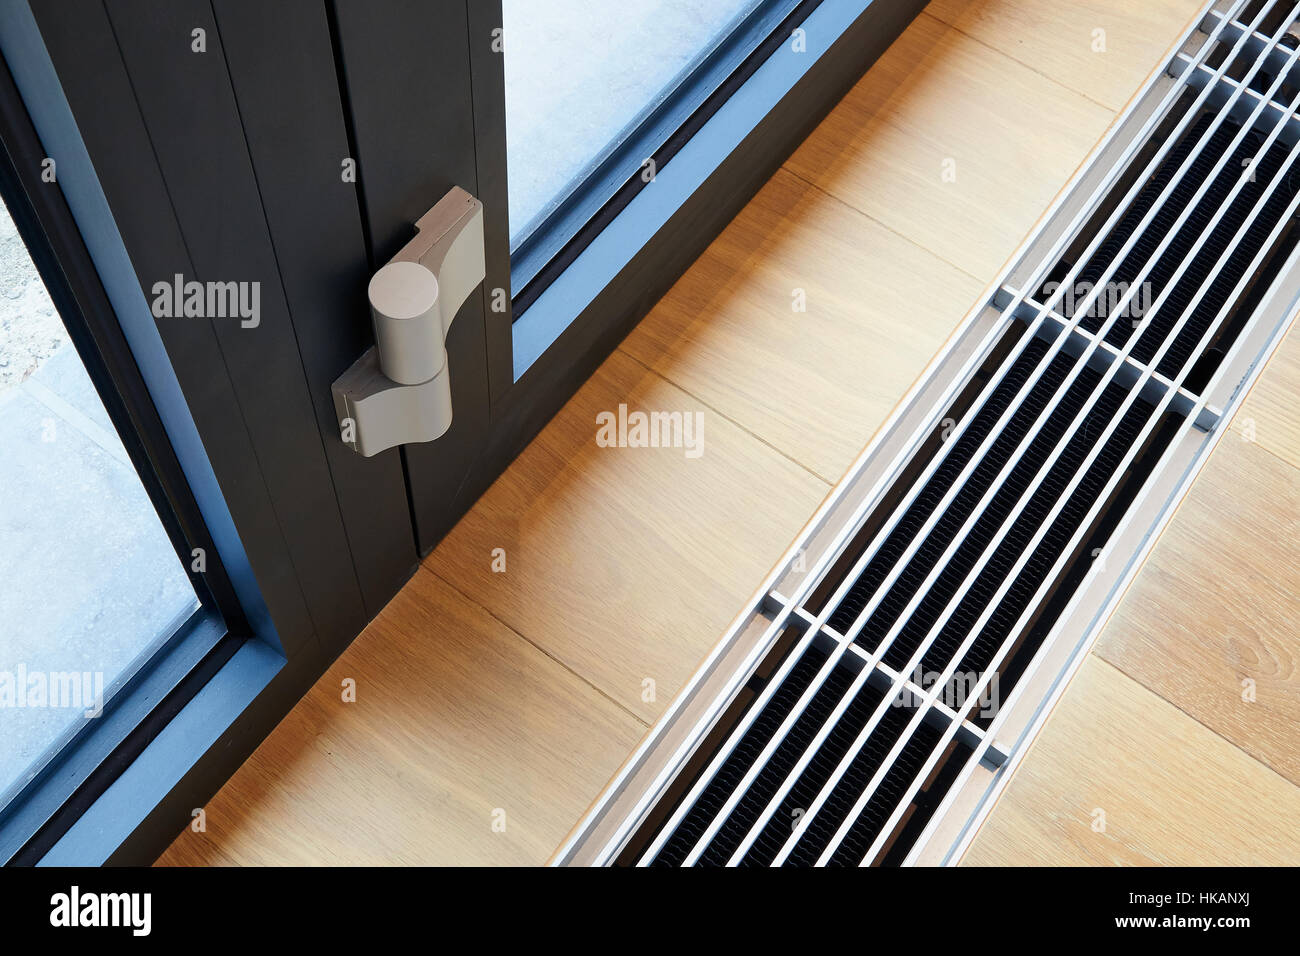 Heating grid with ventilation by the floor in hardwood flooring Stock Photo